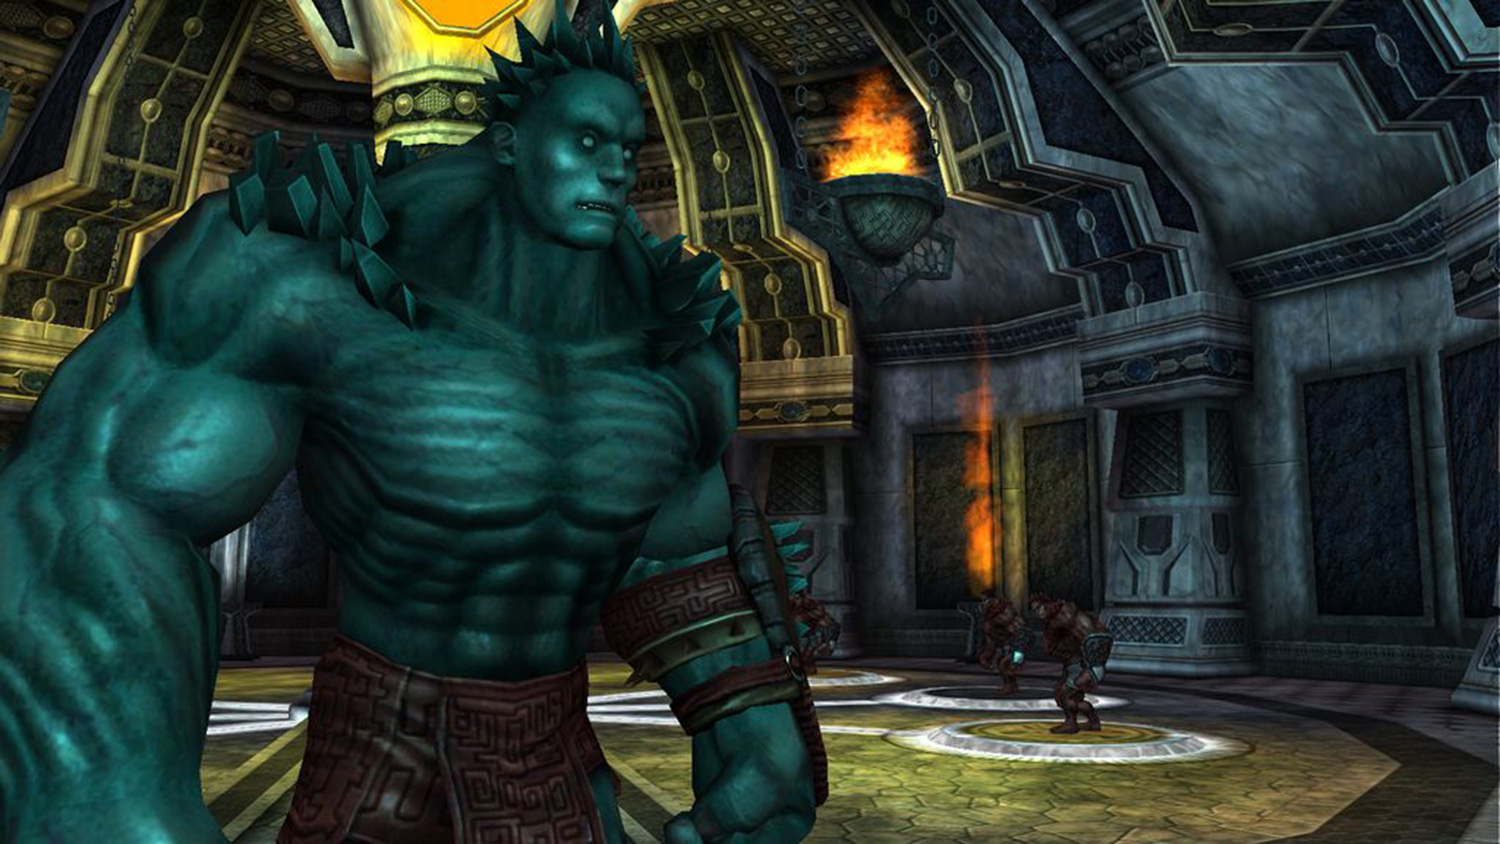 life lessons my dad taught me through everquest screenshots 06